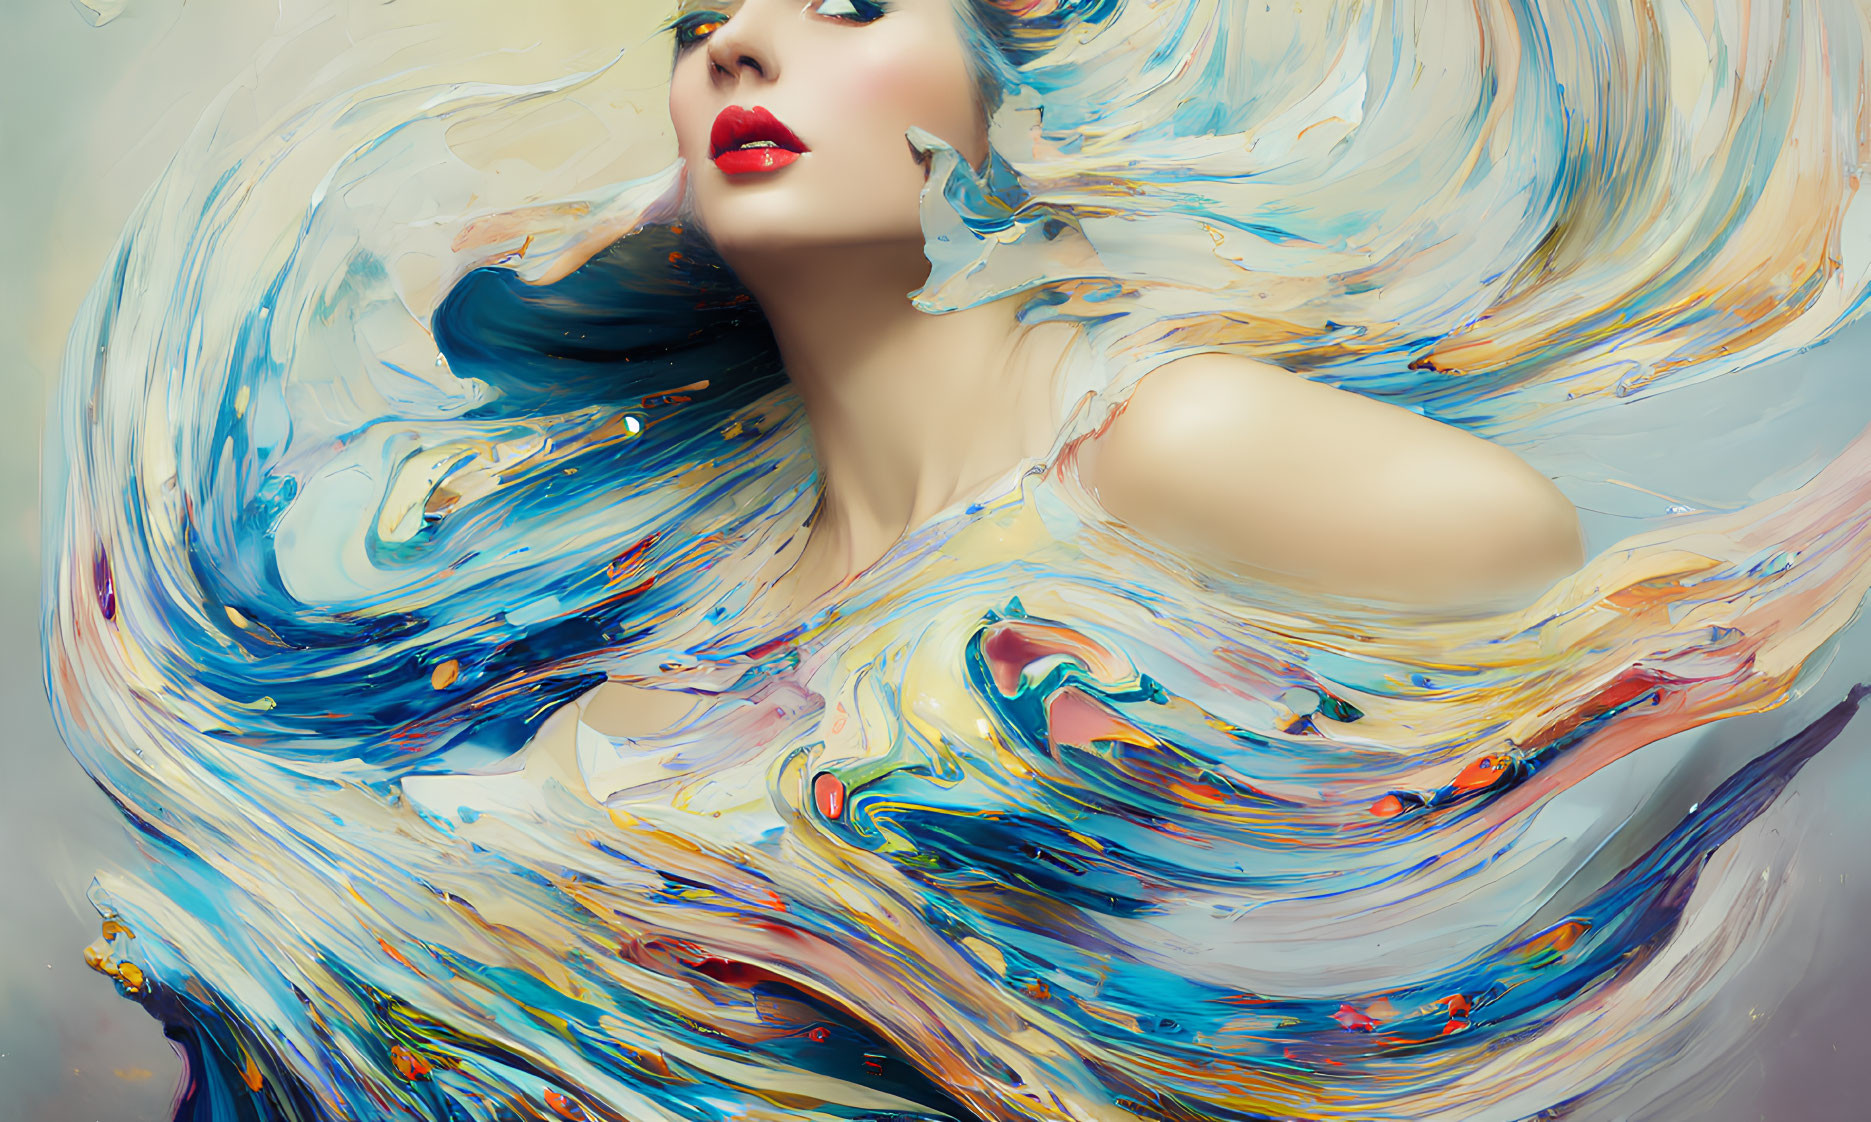 Vibrant woman with red lipstick in colorful paint swirls